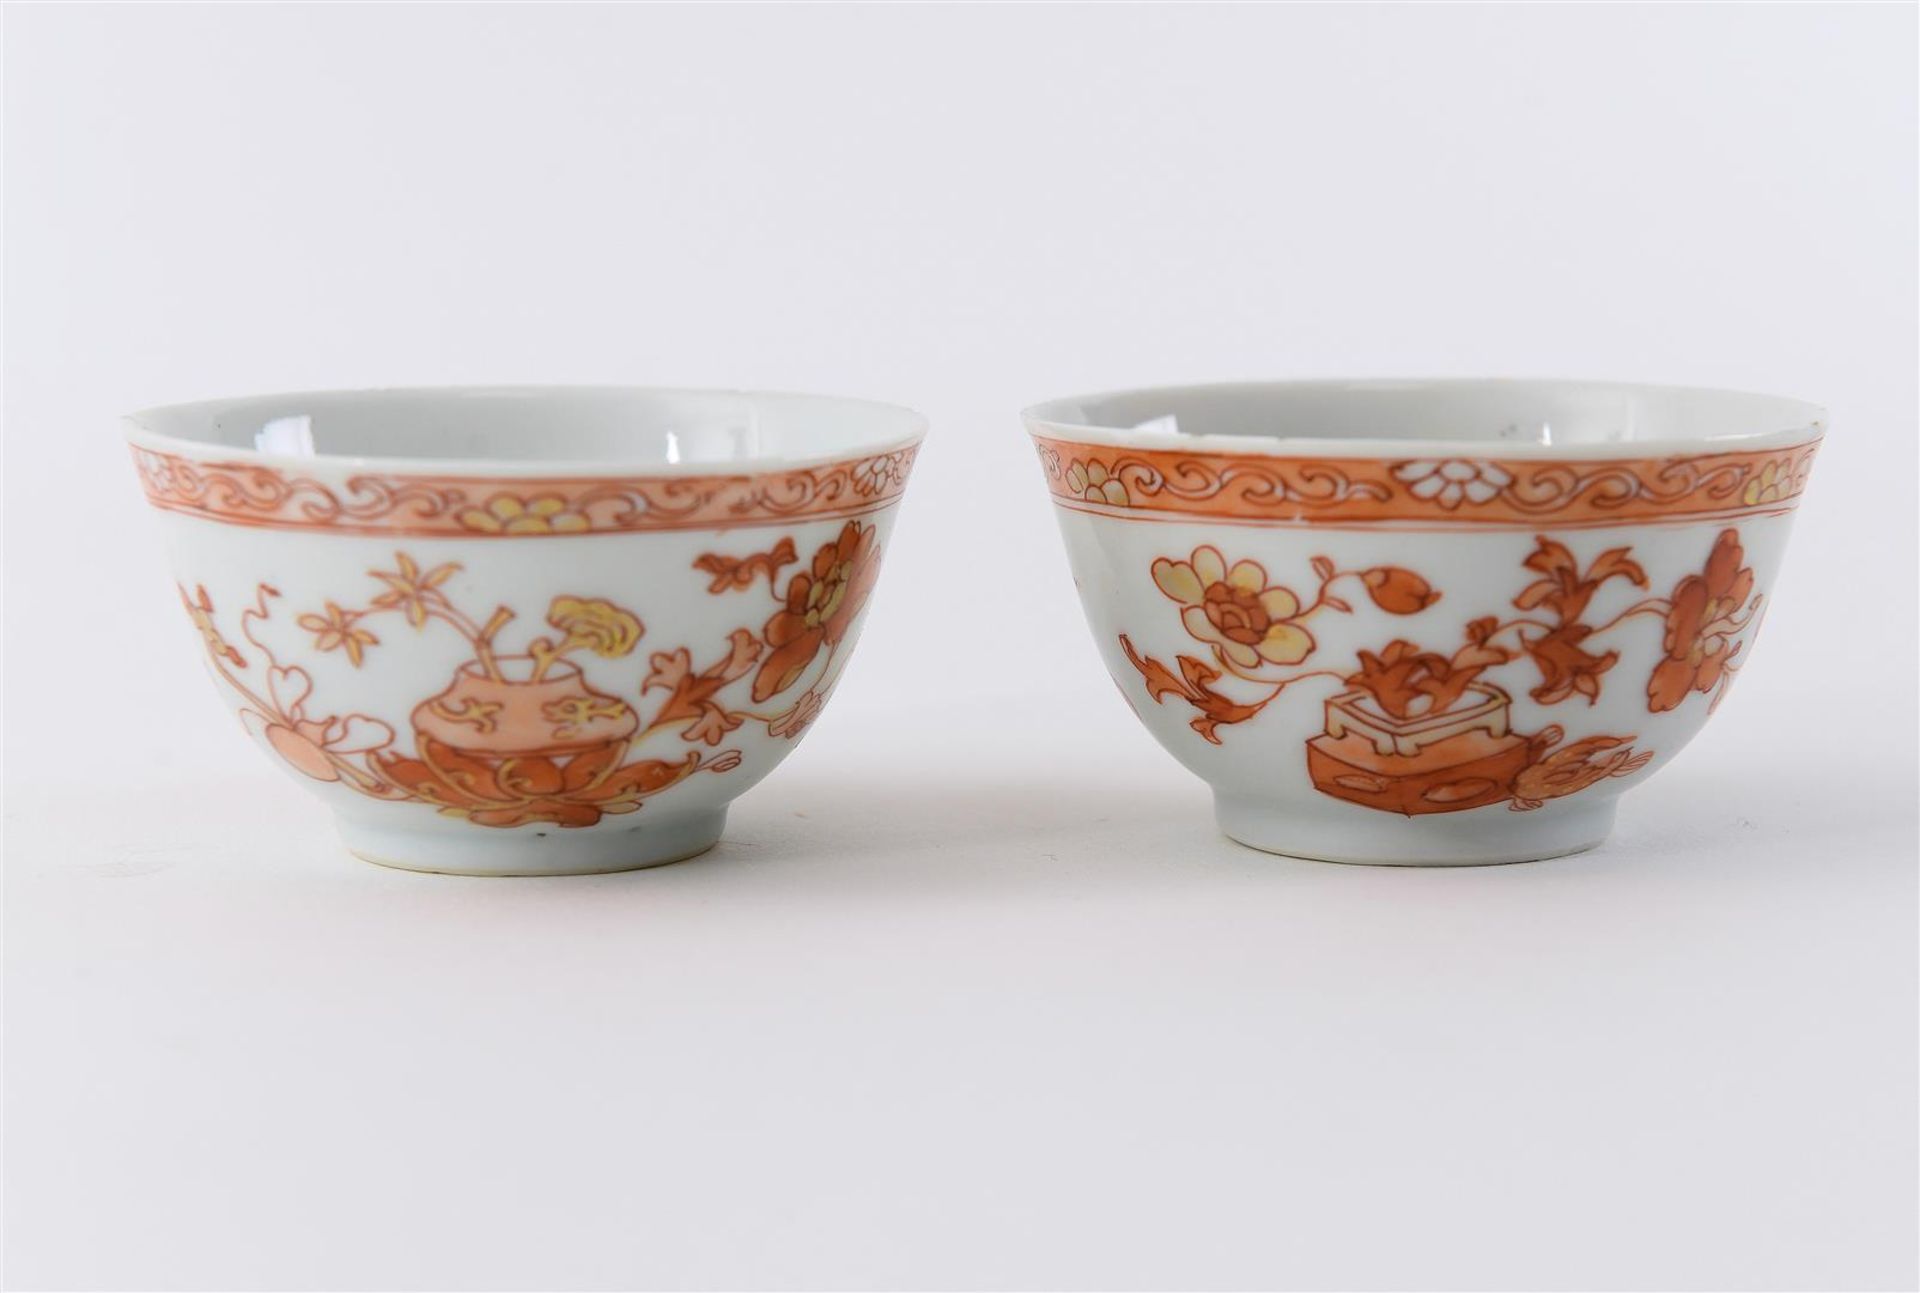 A set of four red and white porcelain cups with saucers, decorated with flower vases. Unmarked. - Image 5 of 5